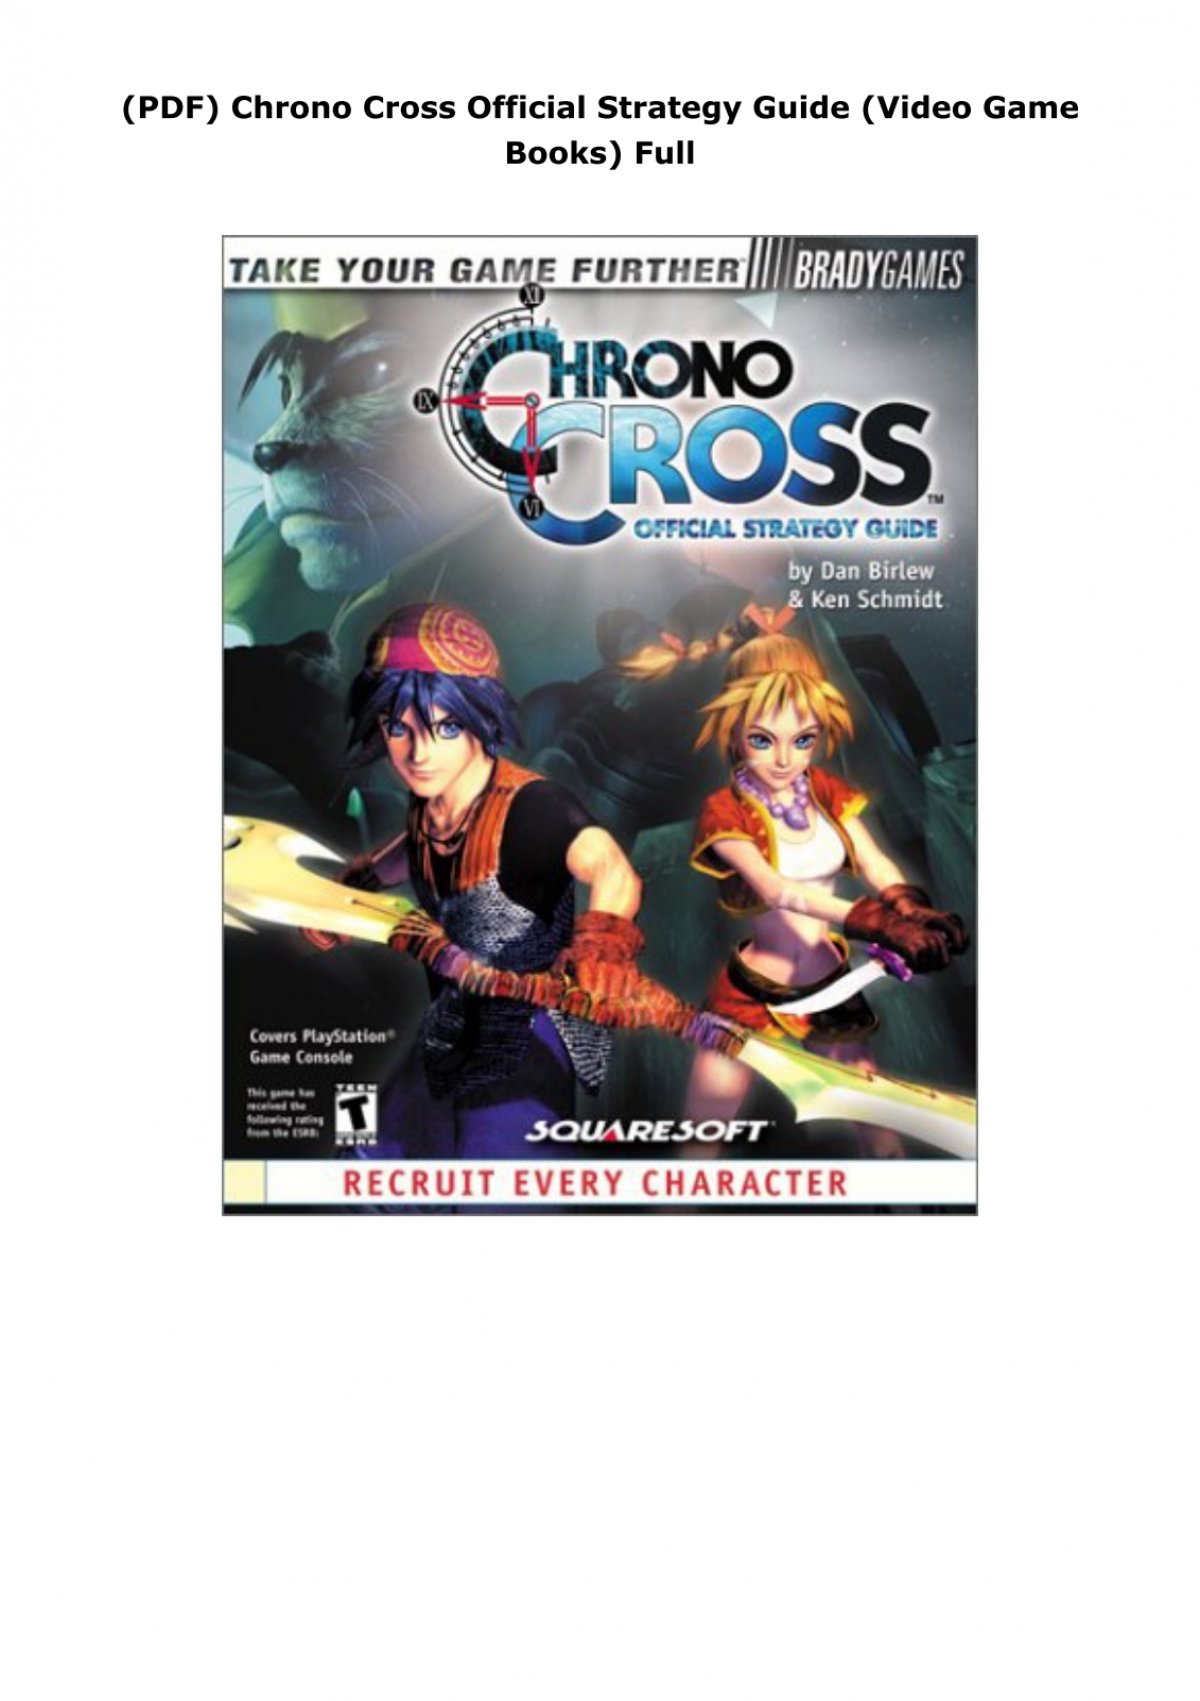 PDF) Chrono Cross Official Strategy Guide (Video Game Books) Full